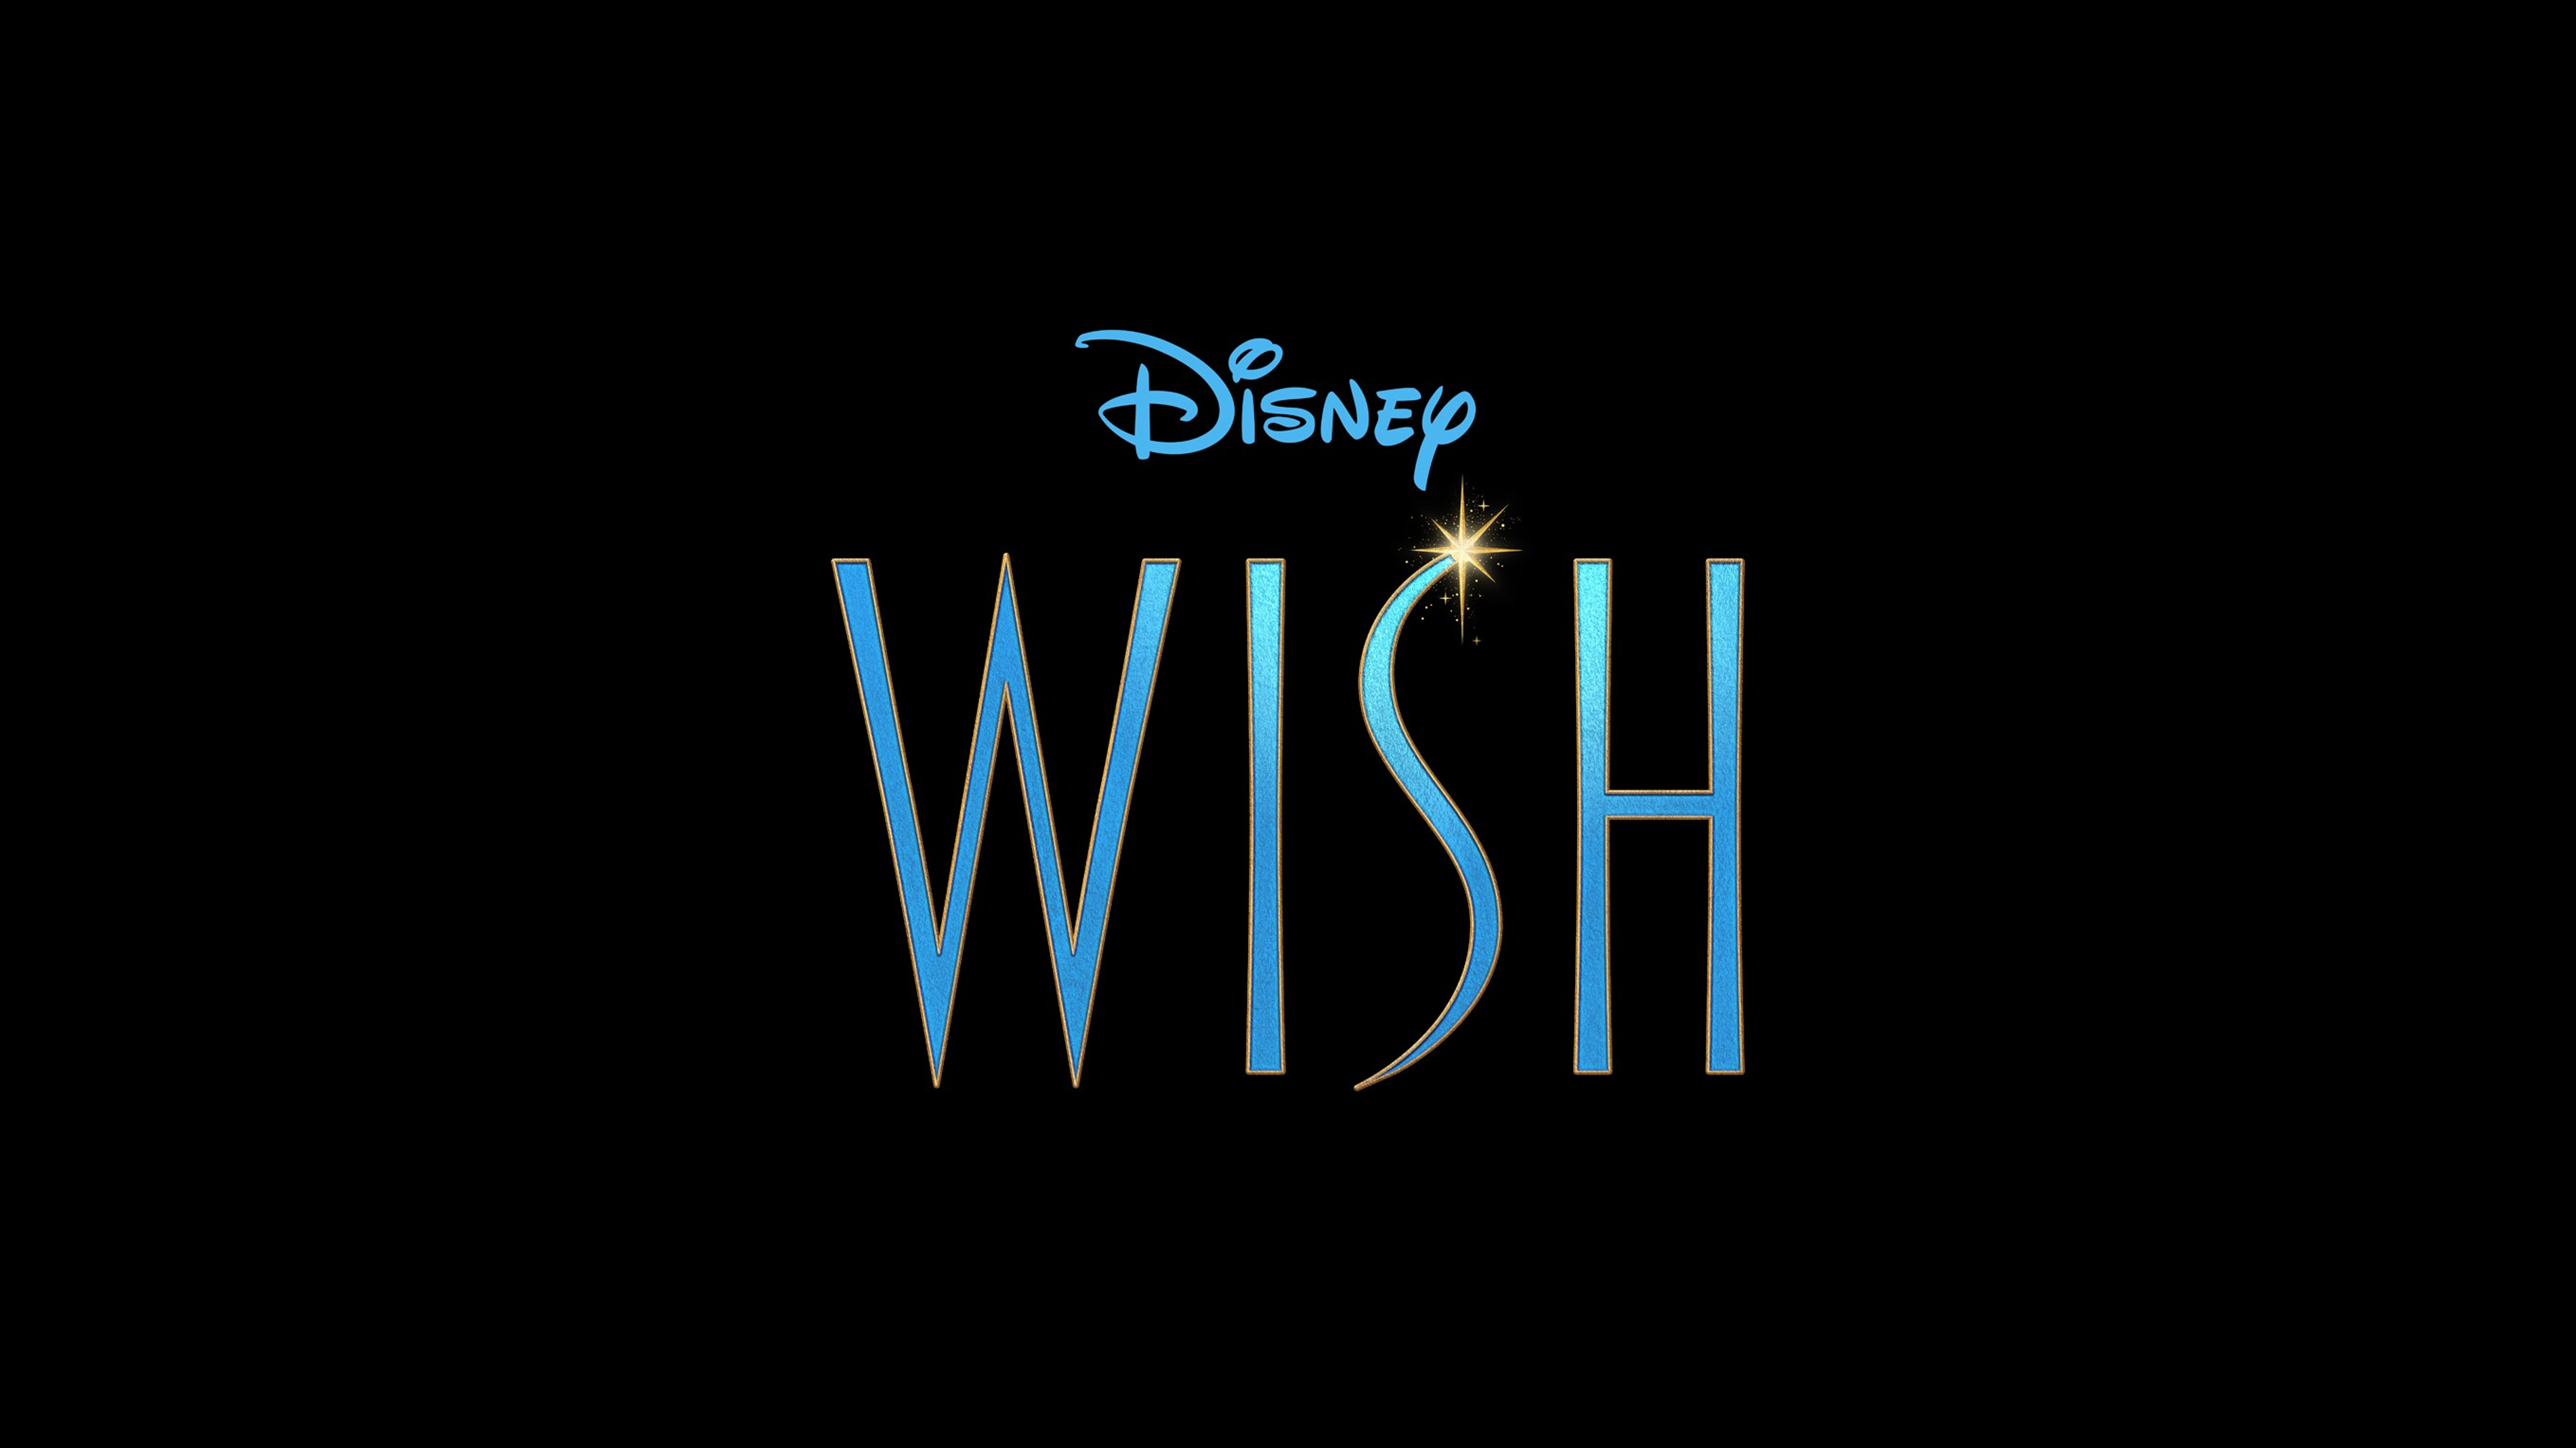 WALT DISNEY ANIMATION STUDIOS’ “WISH” – NEW TRAILER, POSTER AND IMAGES NOW AVAILABLE